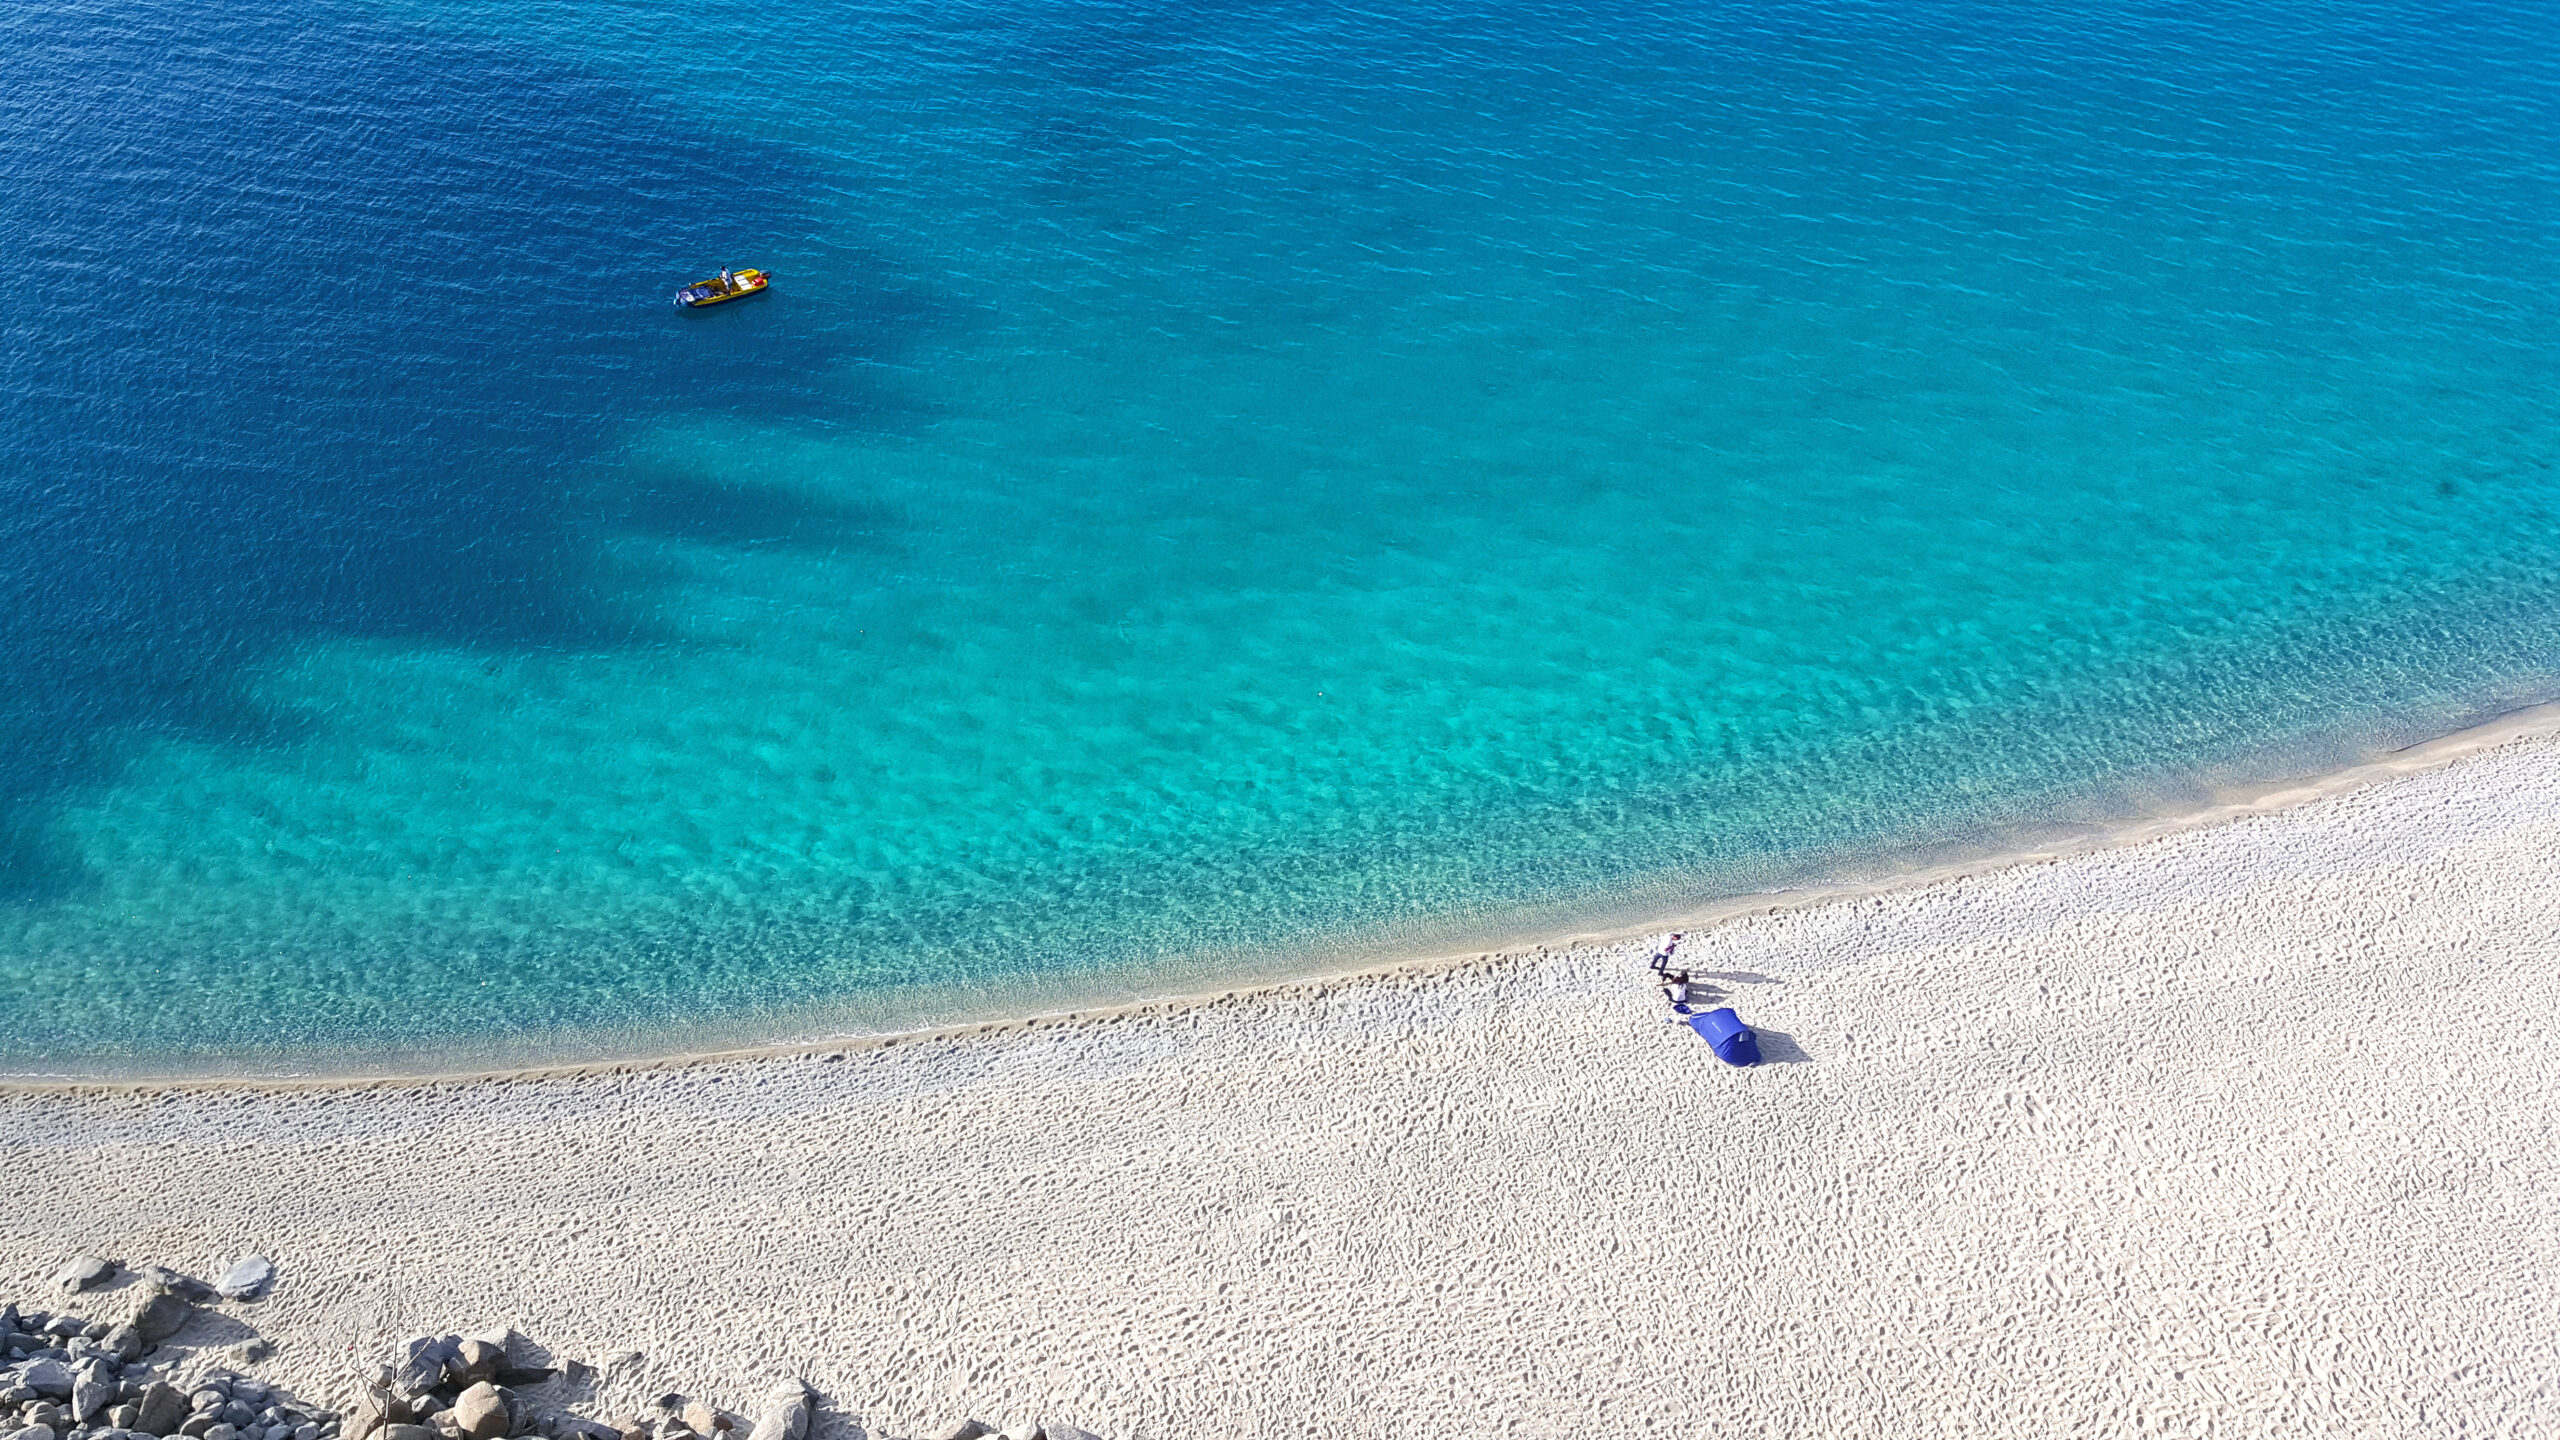 Crystal clear waters in Tropea located in the South of Italy